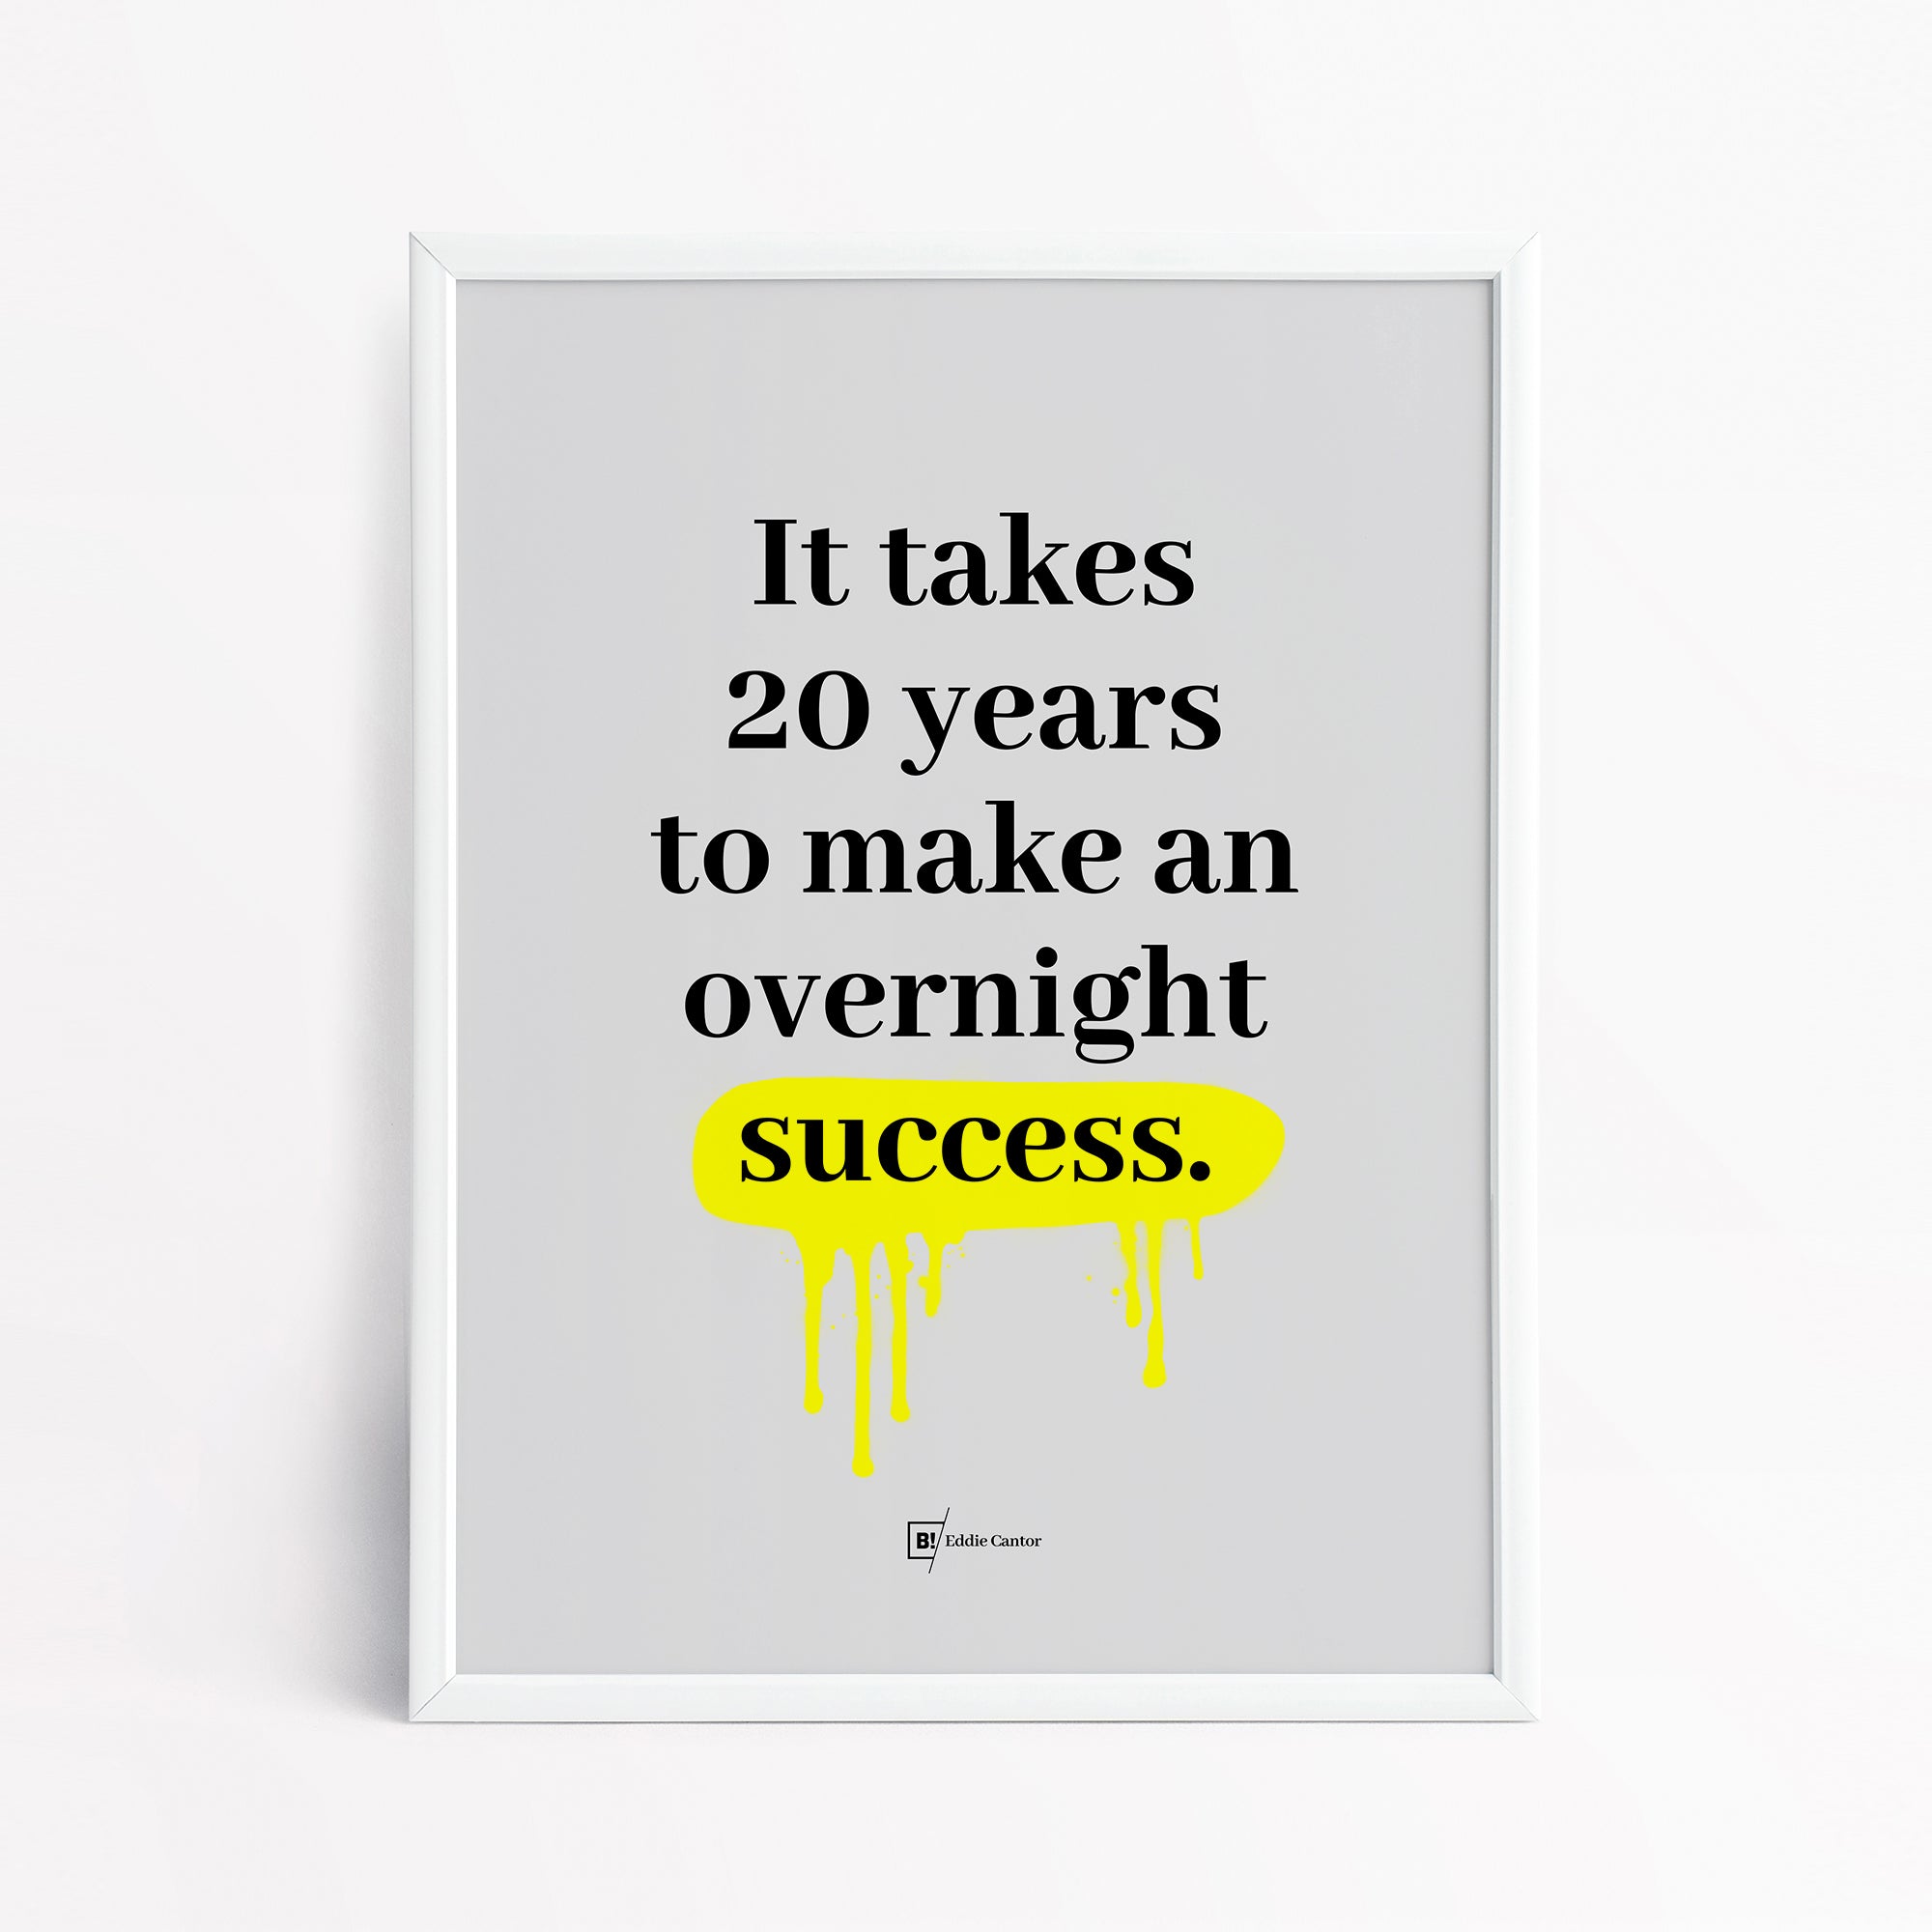 Be inspired by Eddie Cantor's famous "It takes 20 years to make an overnight success" quote art print. This artwork was printed using the giclée process on archival acid-free paper and is presented in a simple white frame that captures its timeless beauty in every detail.